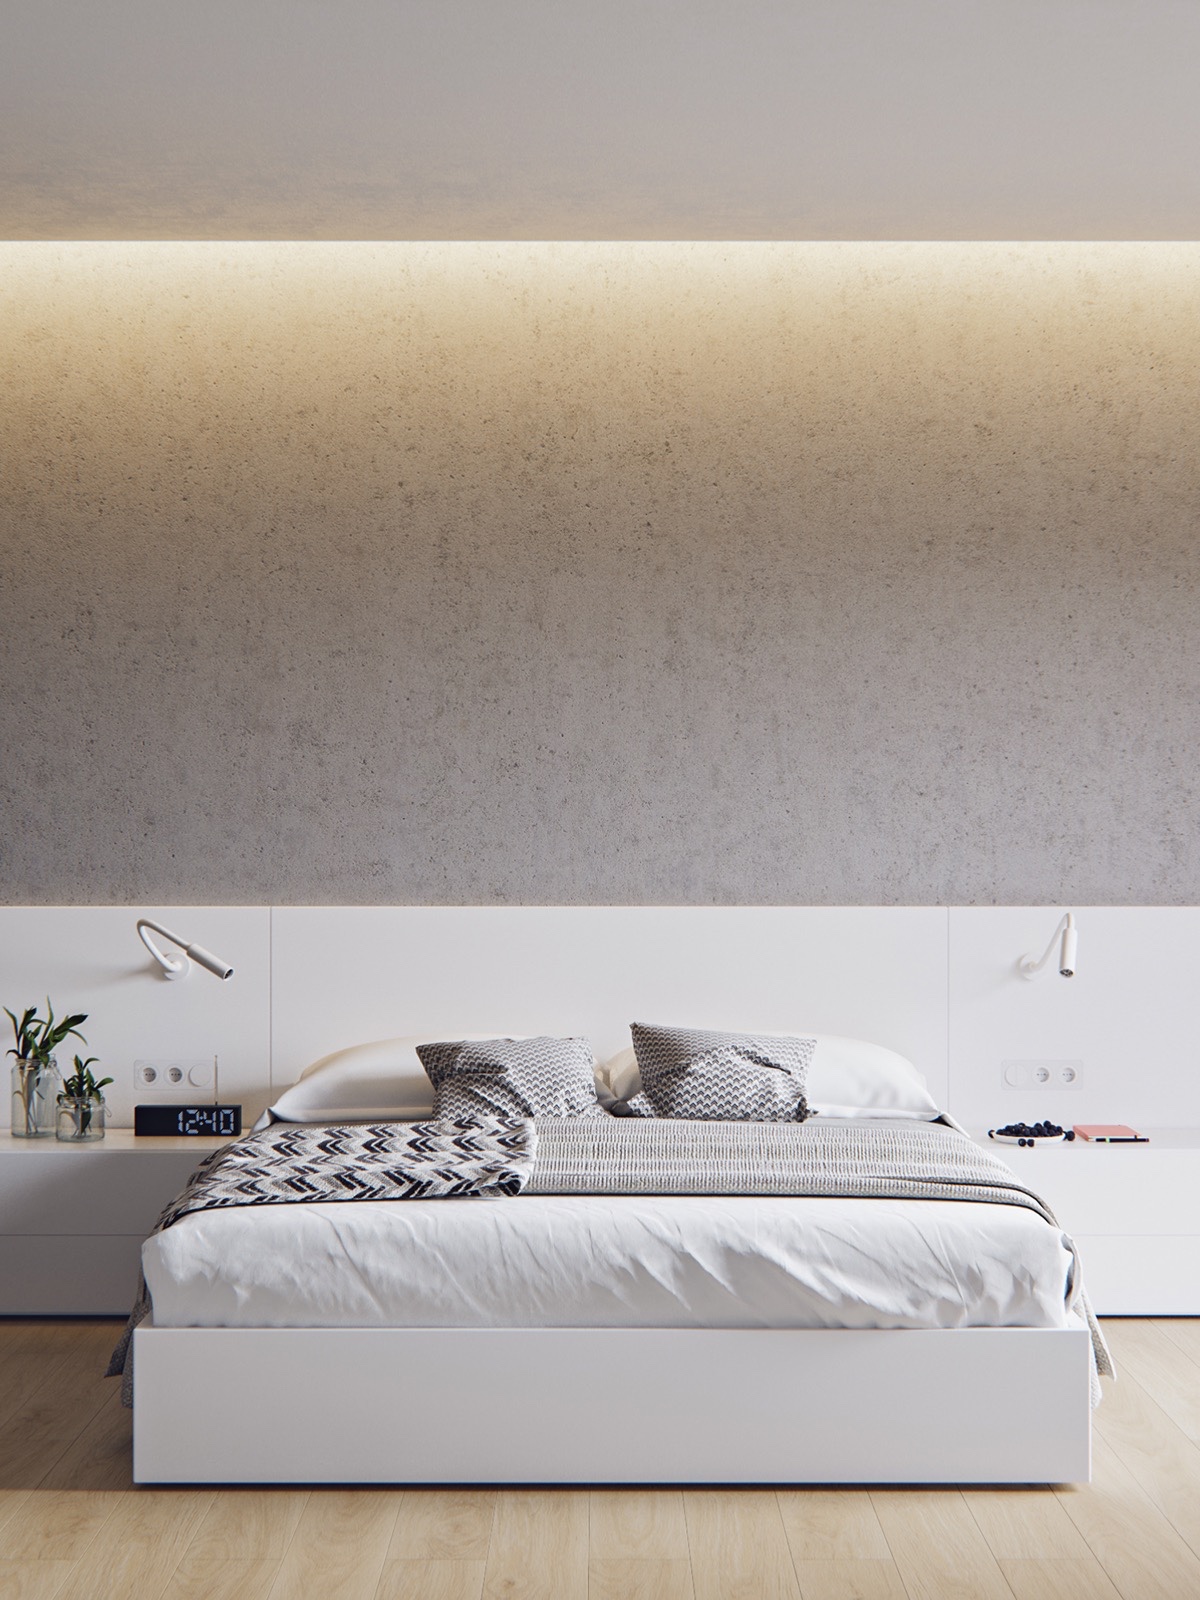 Simple patterns help keep a bedroom interesting and idyllic. A high granite wall breaks this room into parts of three, while light detailing in the granite, pillows and throw add focus.